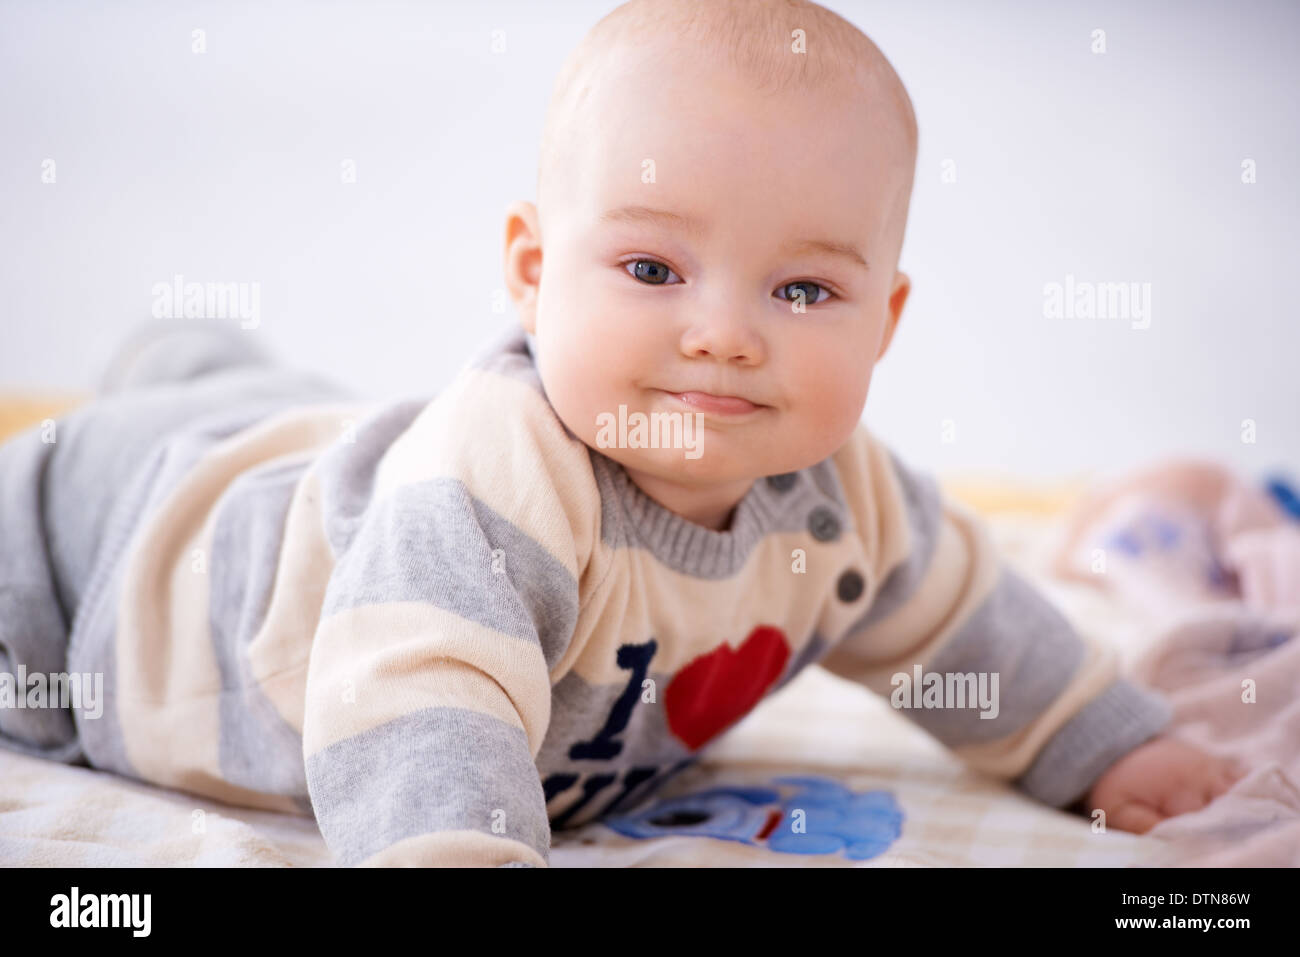 Contented little baby smiling at the camera Stock Photo